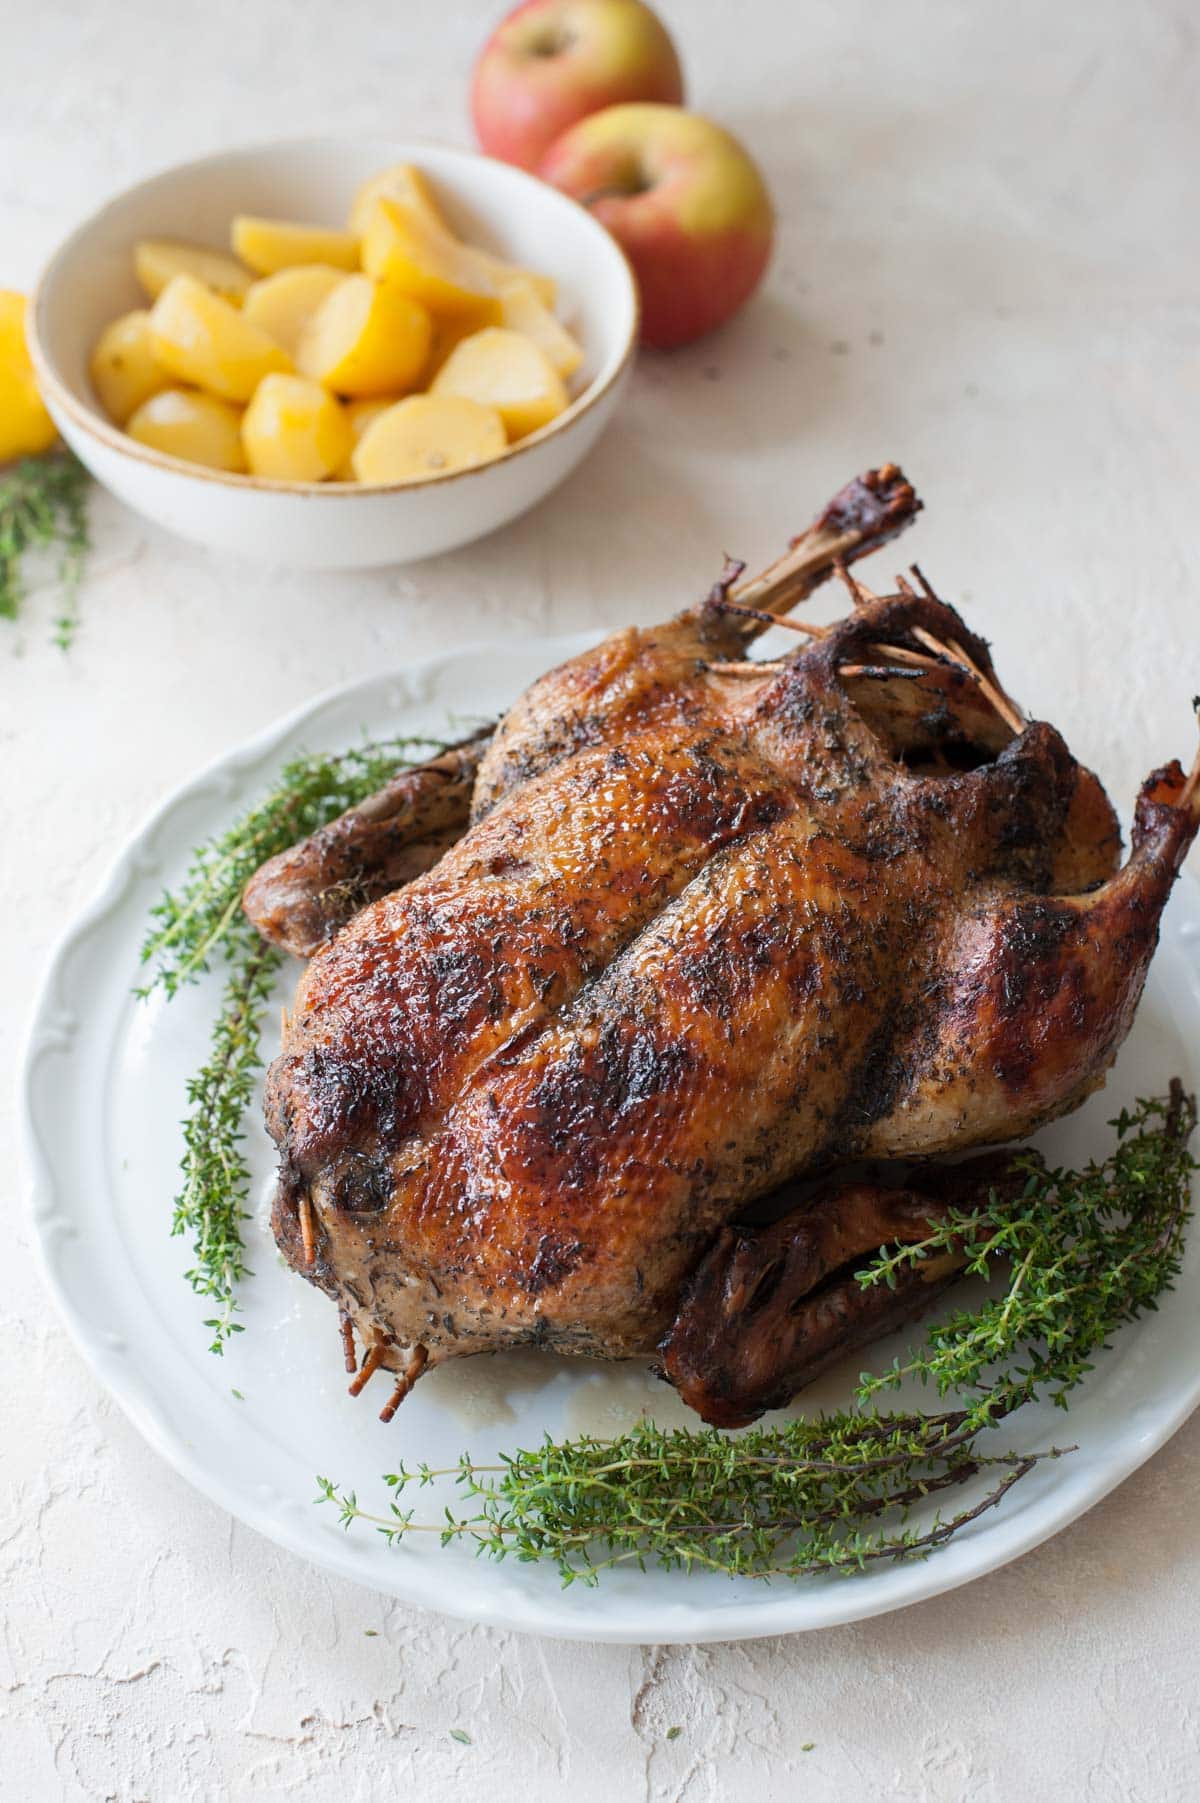 https://www.everyday-delicious.com/wp-content/uploads/2021/10/roast-duck-everyday-delicious-1.jpg